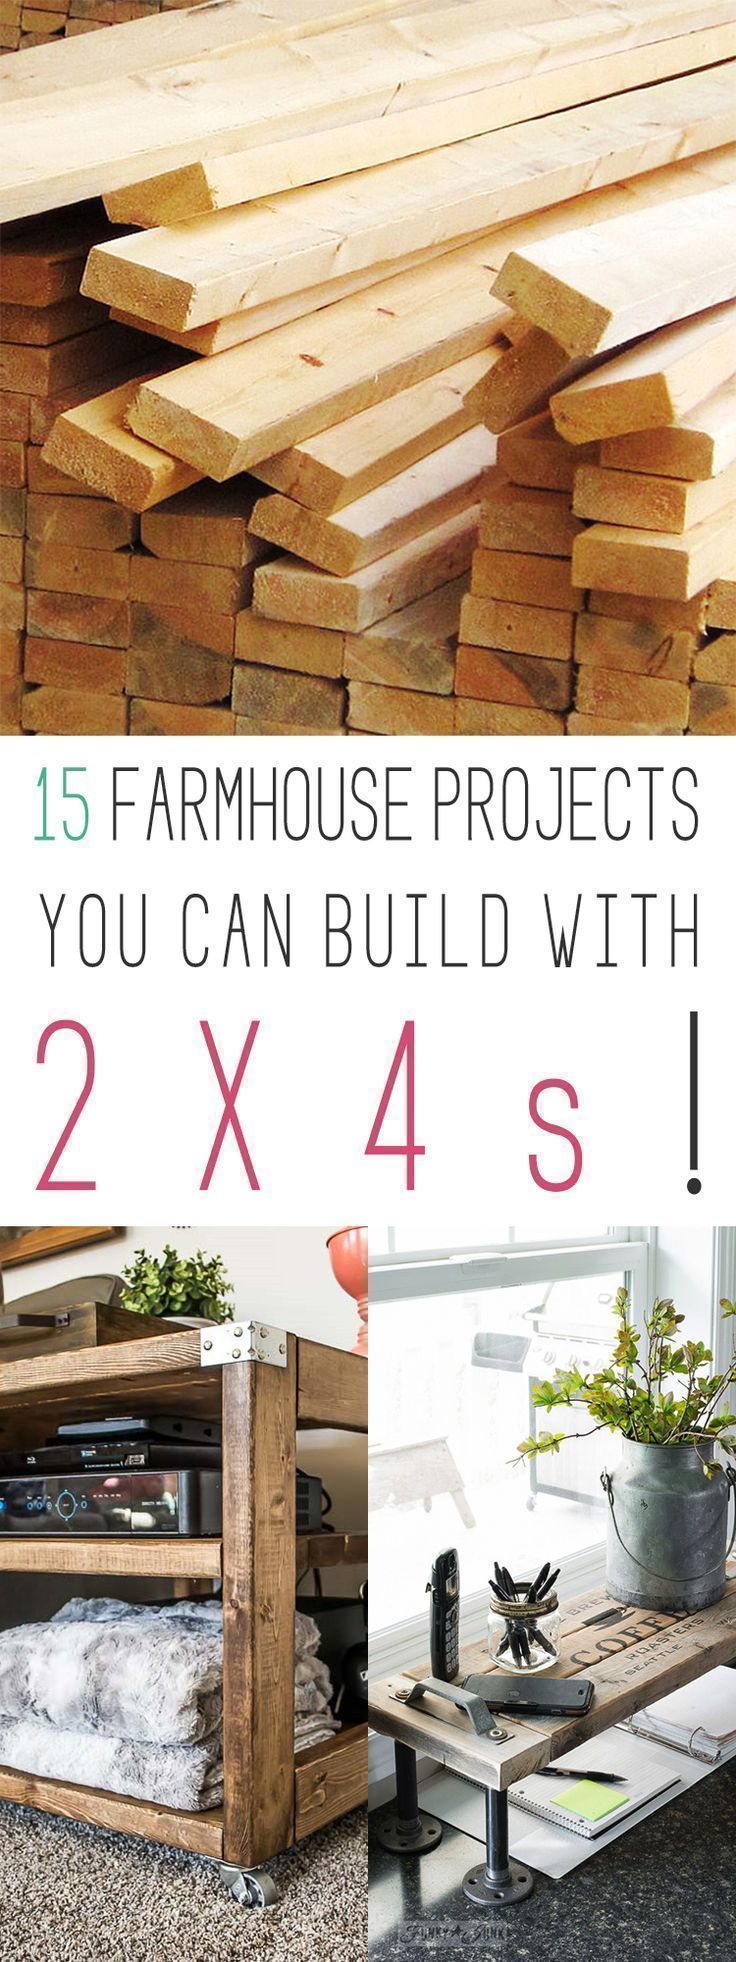 15 Farmhouse Projects You Can Build With 2X4s - The Cottage Market - 15 Farmhouse Projects You Can Build With 2X4s - The Cottage Market -   19 diy Projects with wood ideas